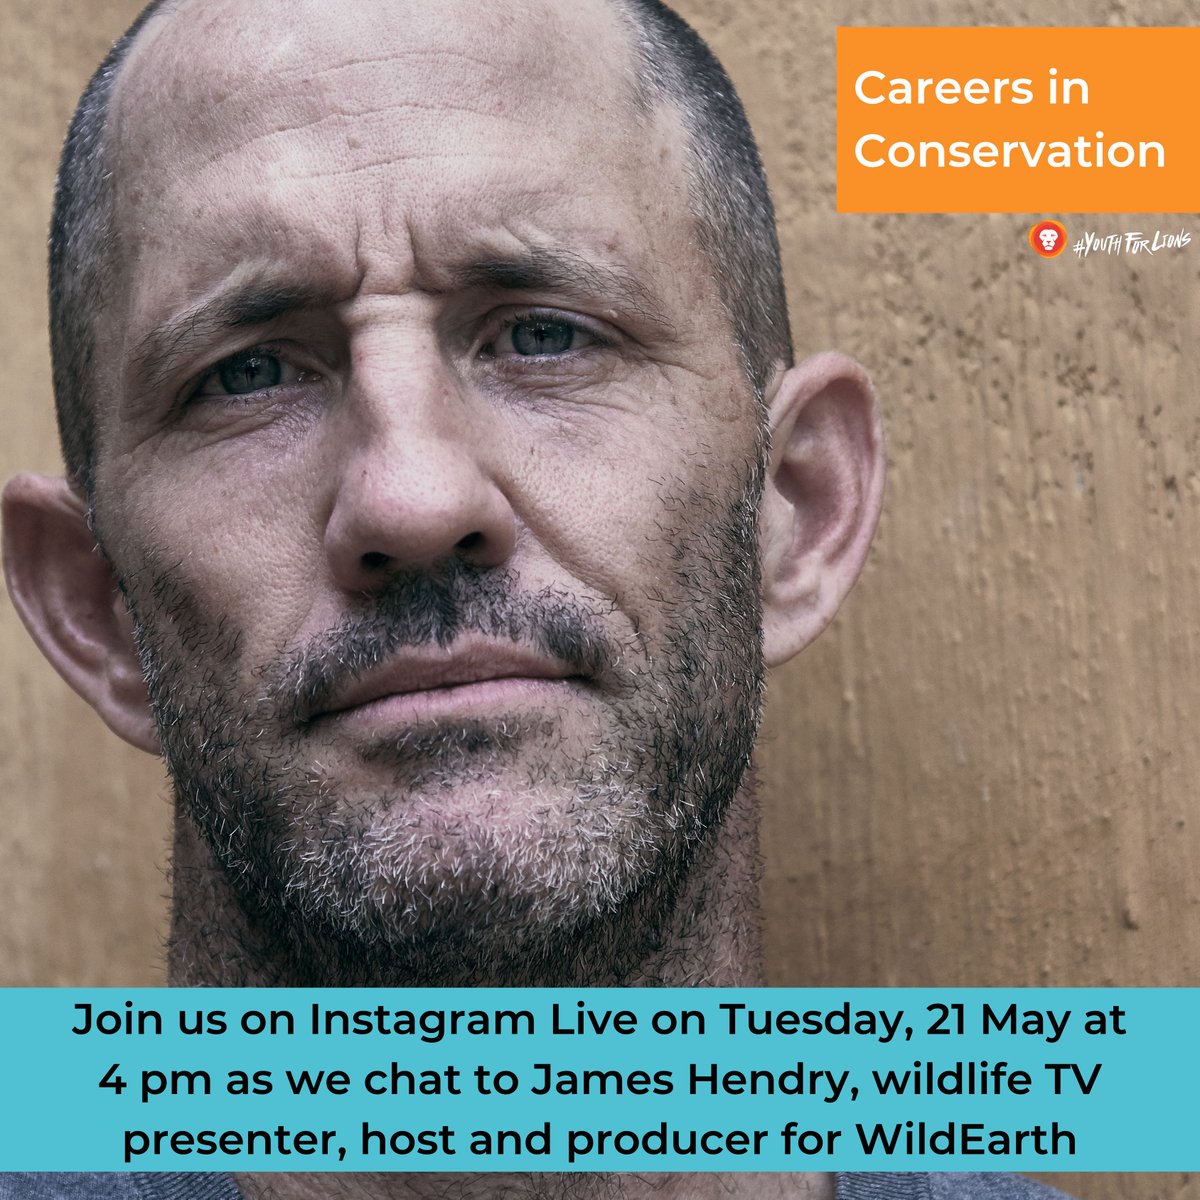 Interested in a career in conservation? Join us on Tuesday, 21 May at 4 pm as we chat to James Hendry, a wildlife TV presenter, host and producer from WildEarth TV. Don't miss out on this exciting Live next week.